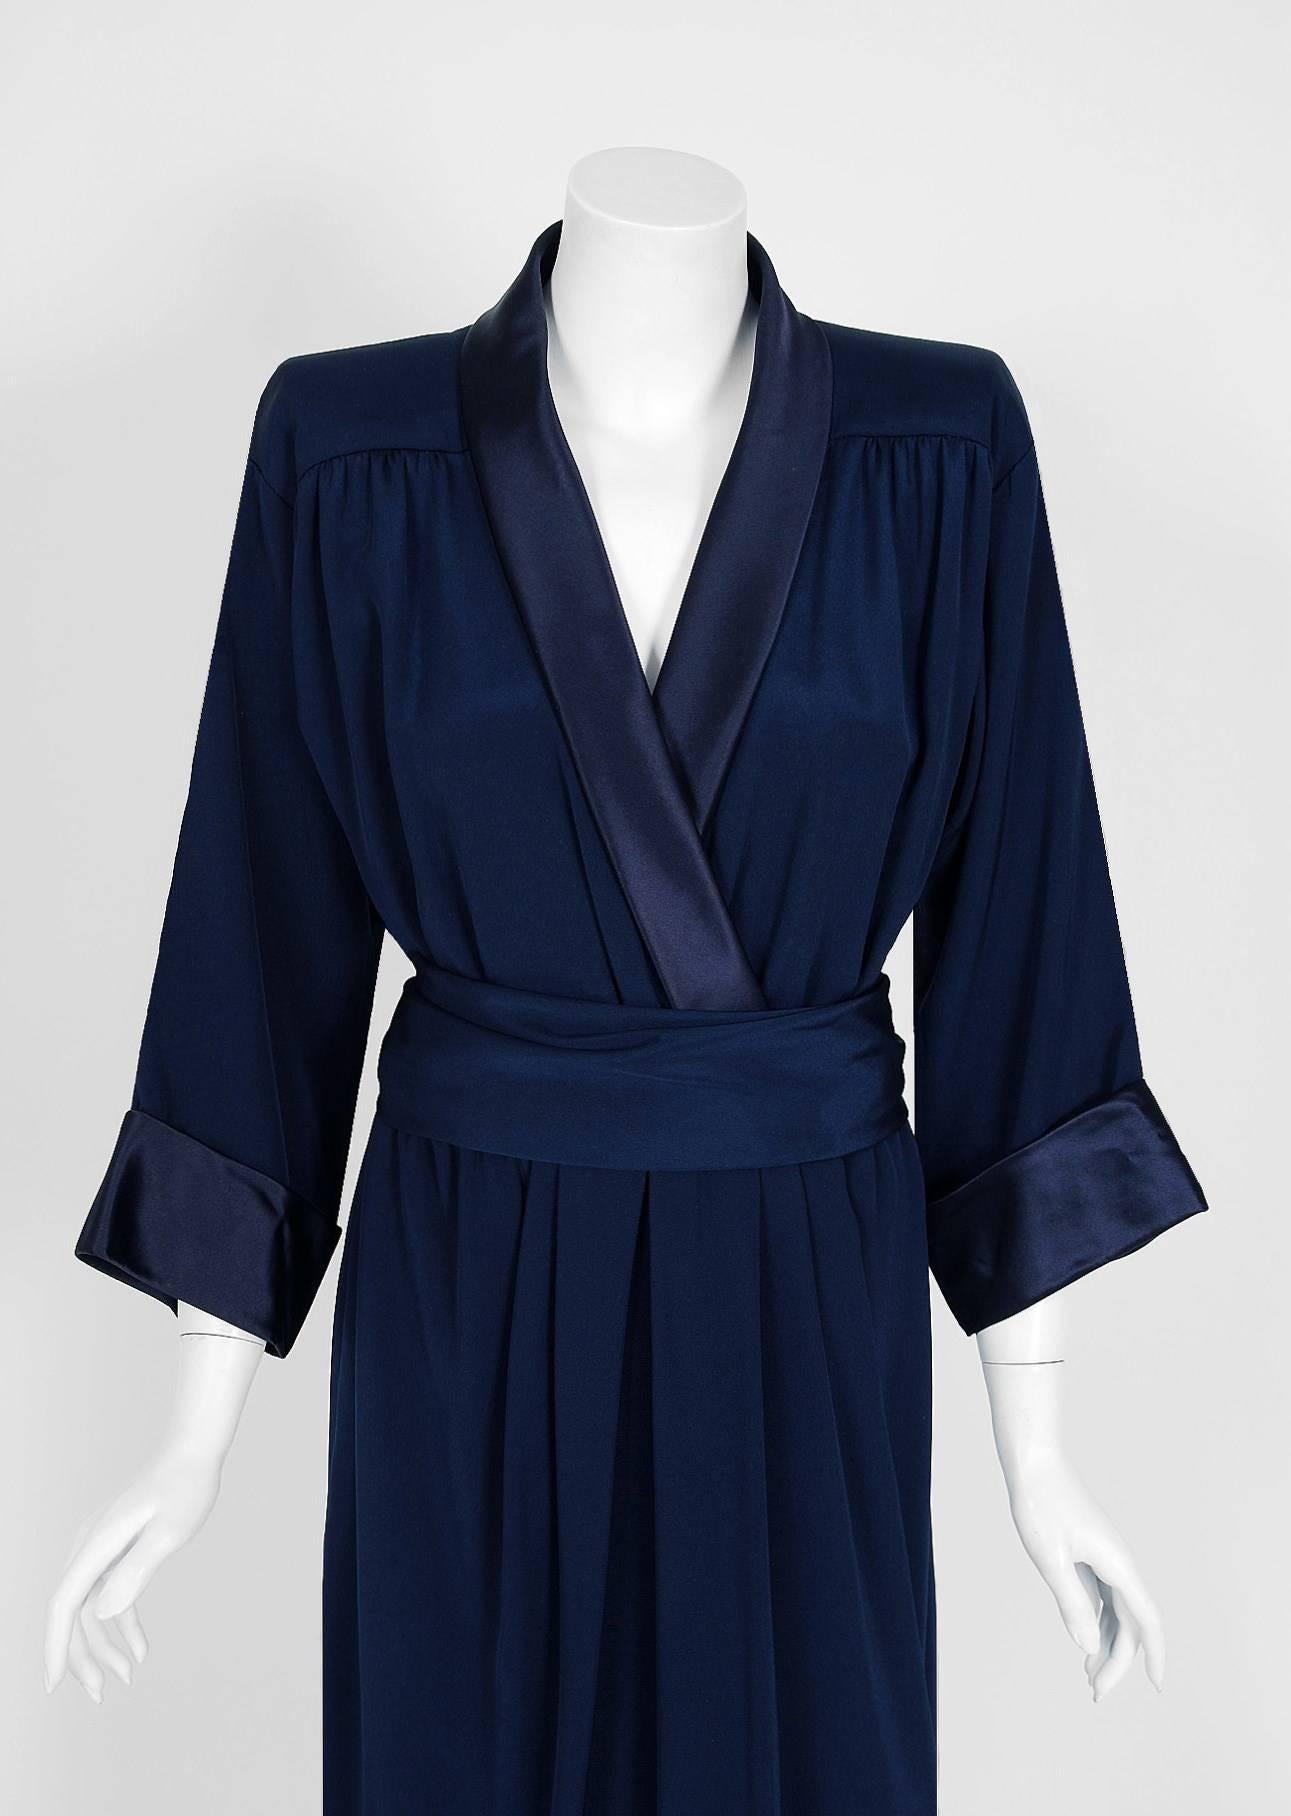 Breathtaking Yves Saint Laurent designer dress from his 1979 collection. Such a rarity to find both pieces together! It is insanely chic with its easy-to-wear wrapped construction. The fabric is a rich navy-blue woven silk complete with liquid satin